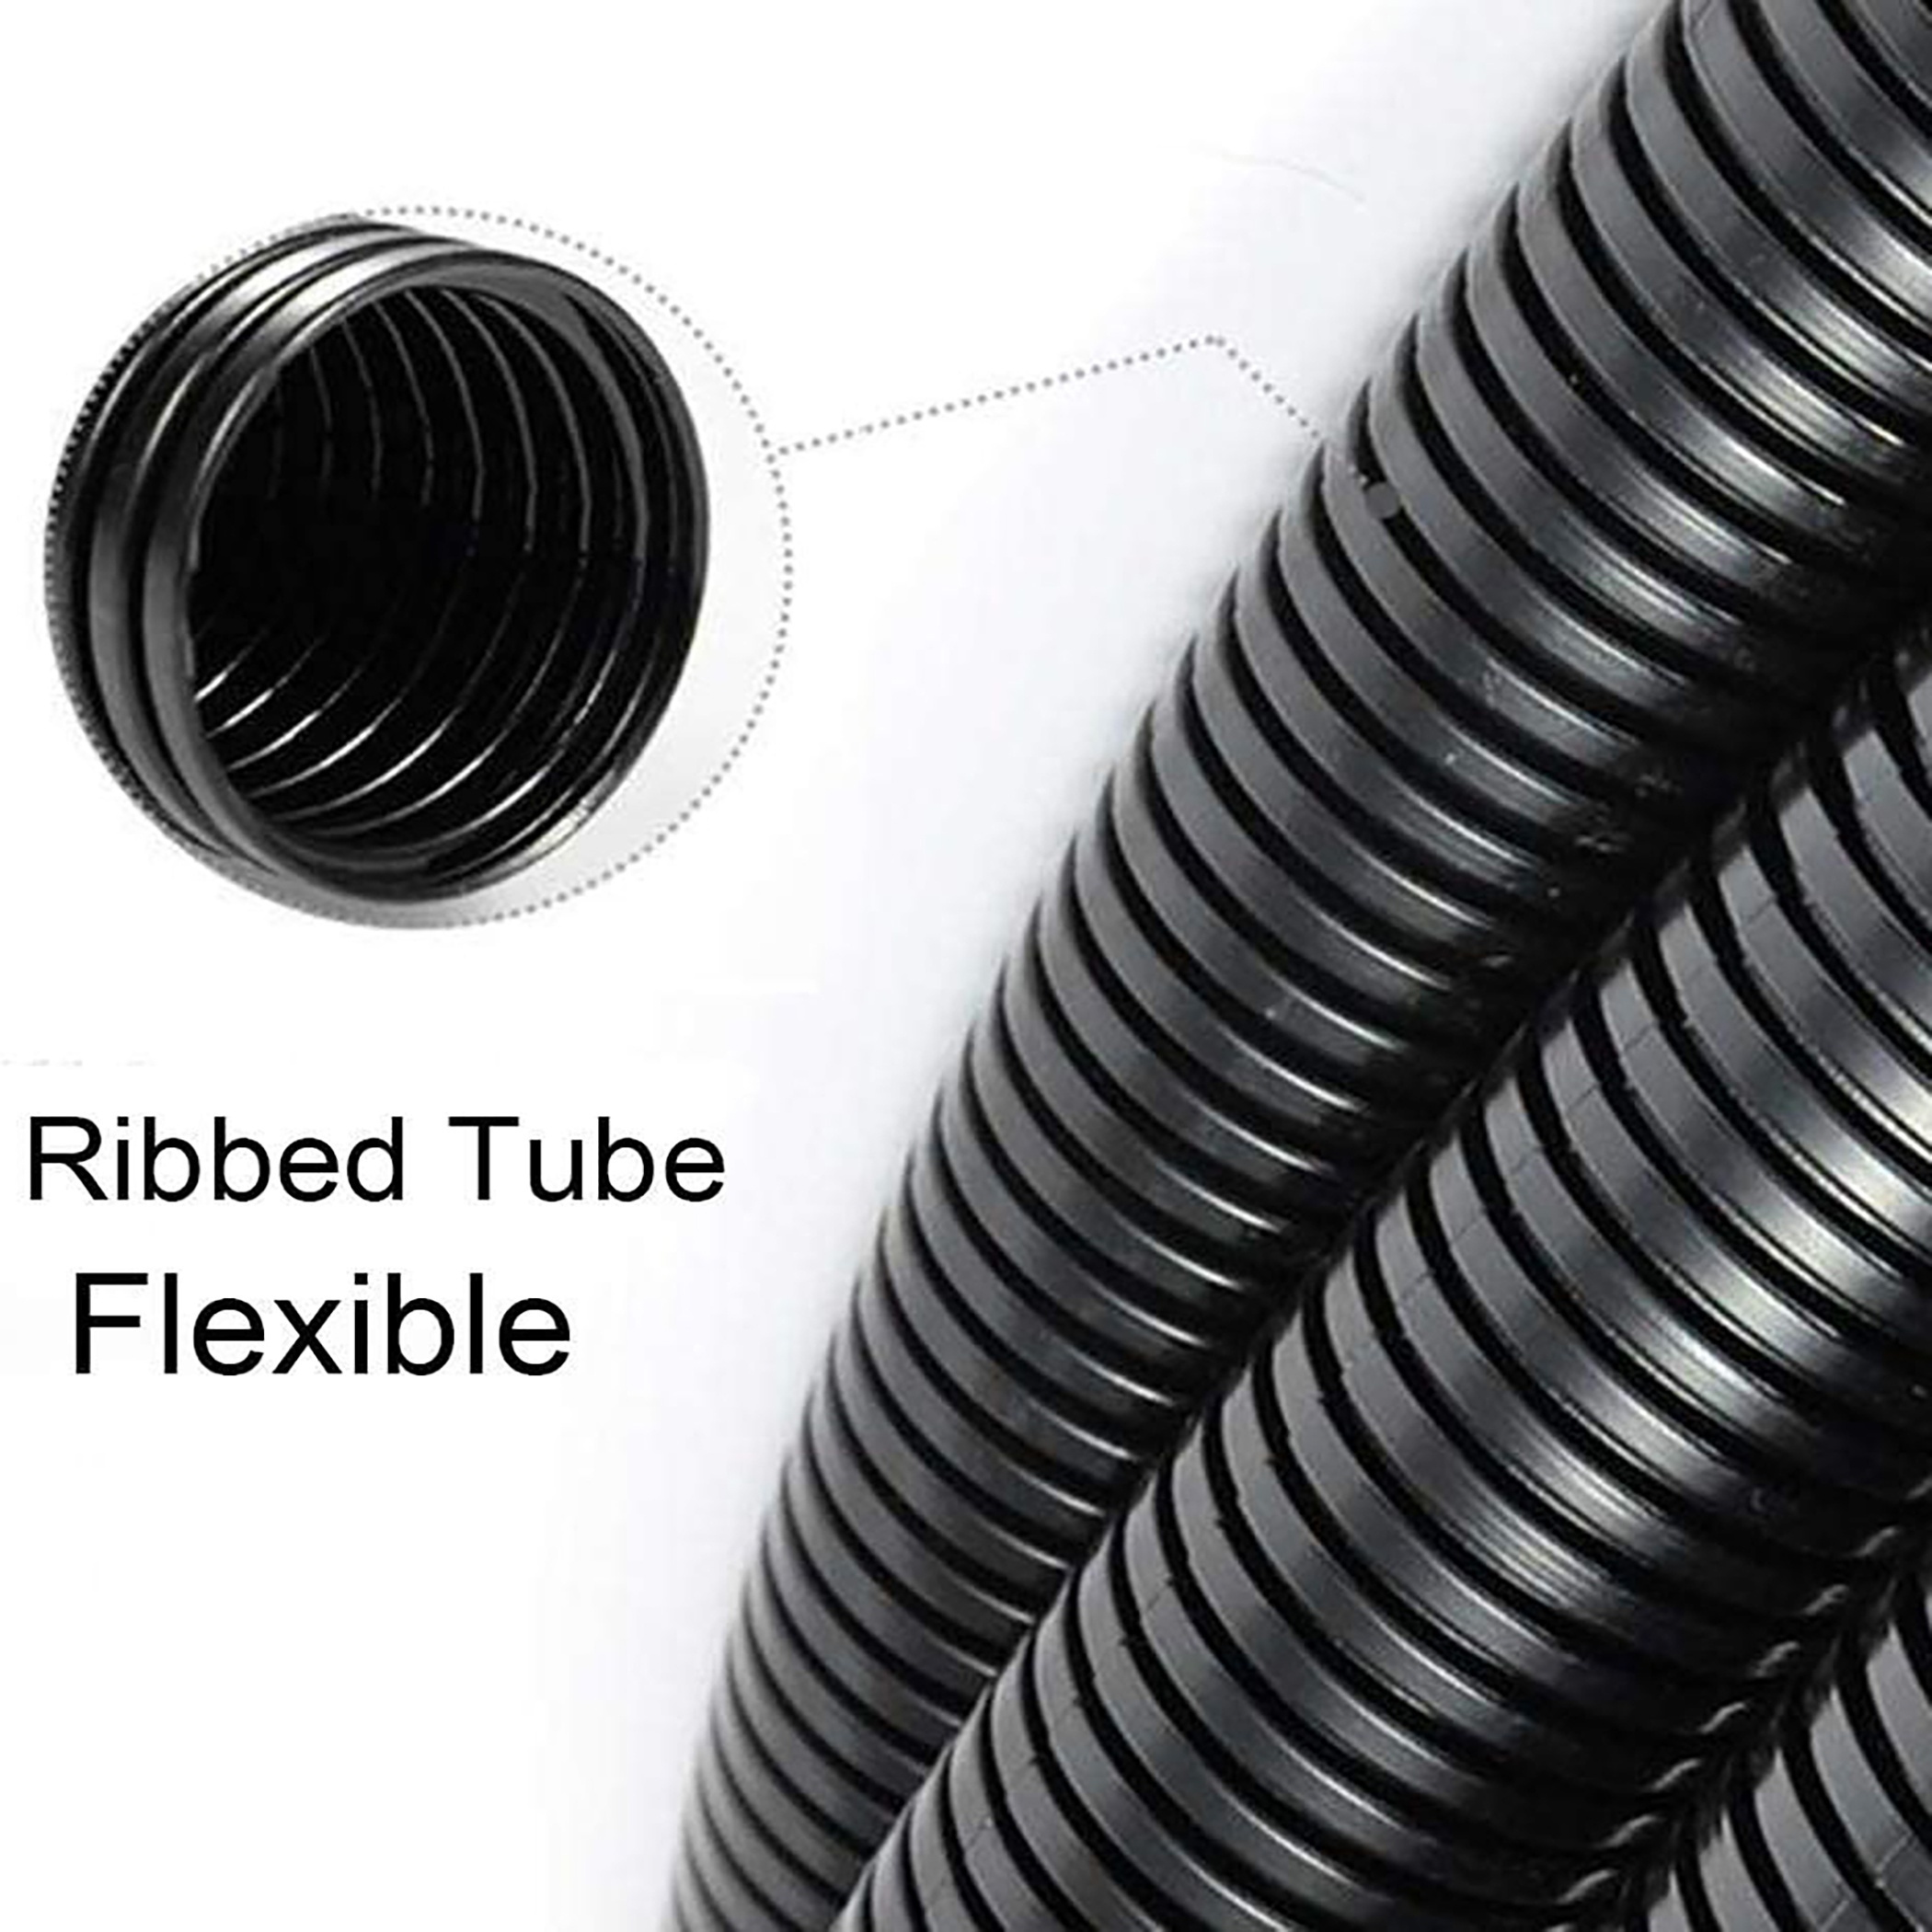 Corrugated Split Wire Cable Flex Tubing Sleeve Wiring Loom Wire